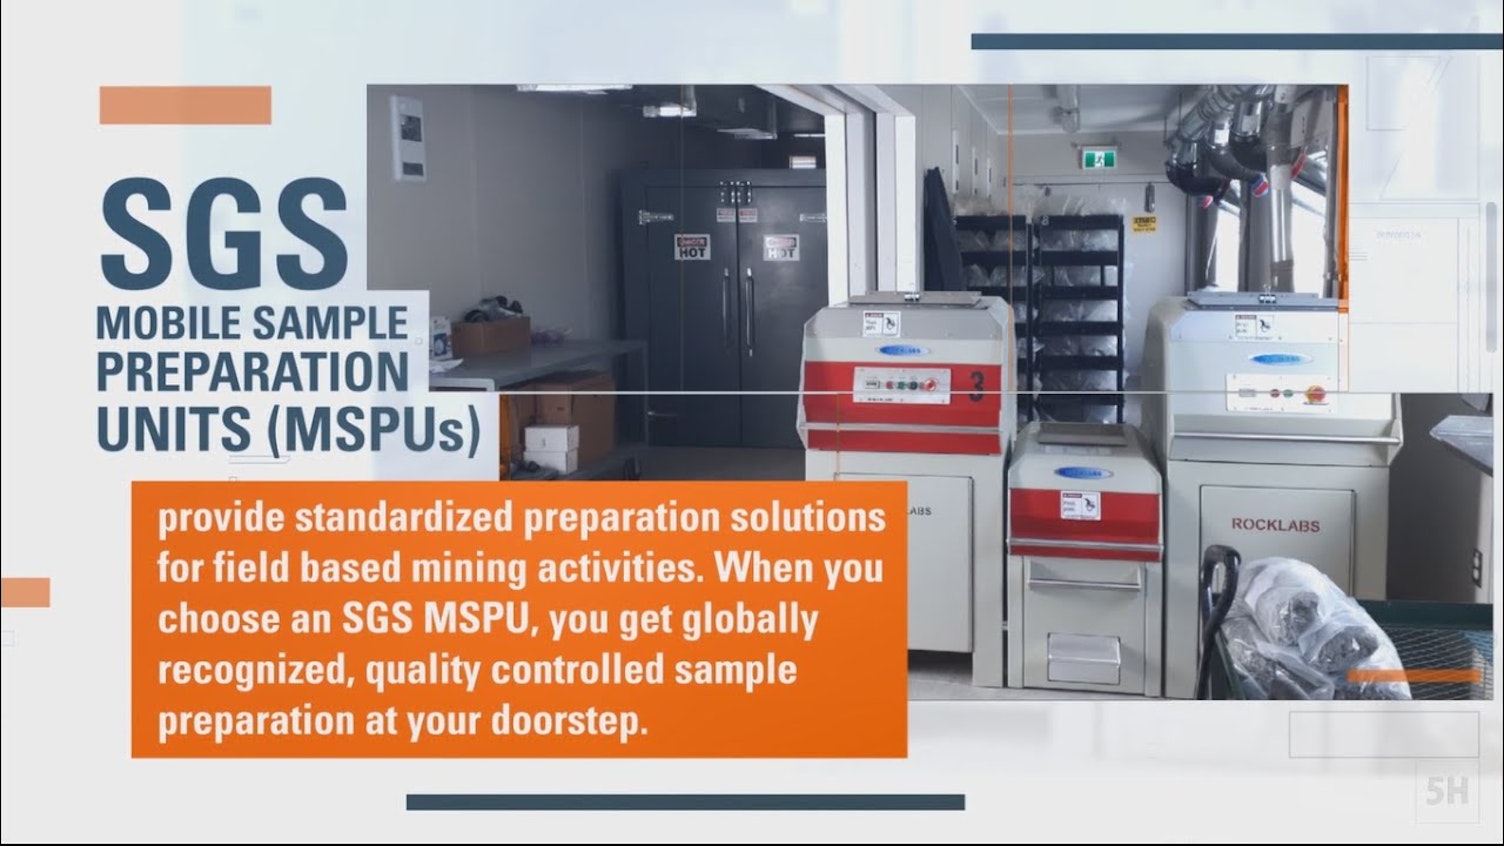 An Overview of SGS Mobile Sample Preparation Units